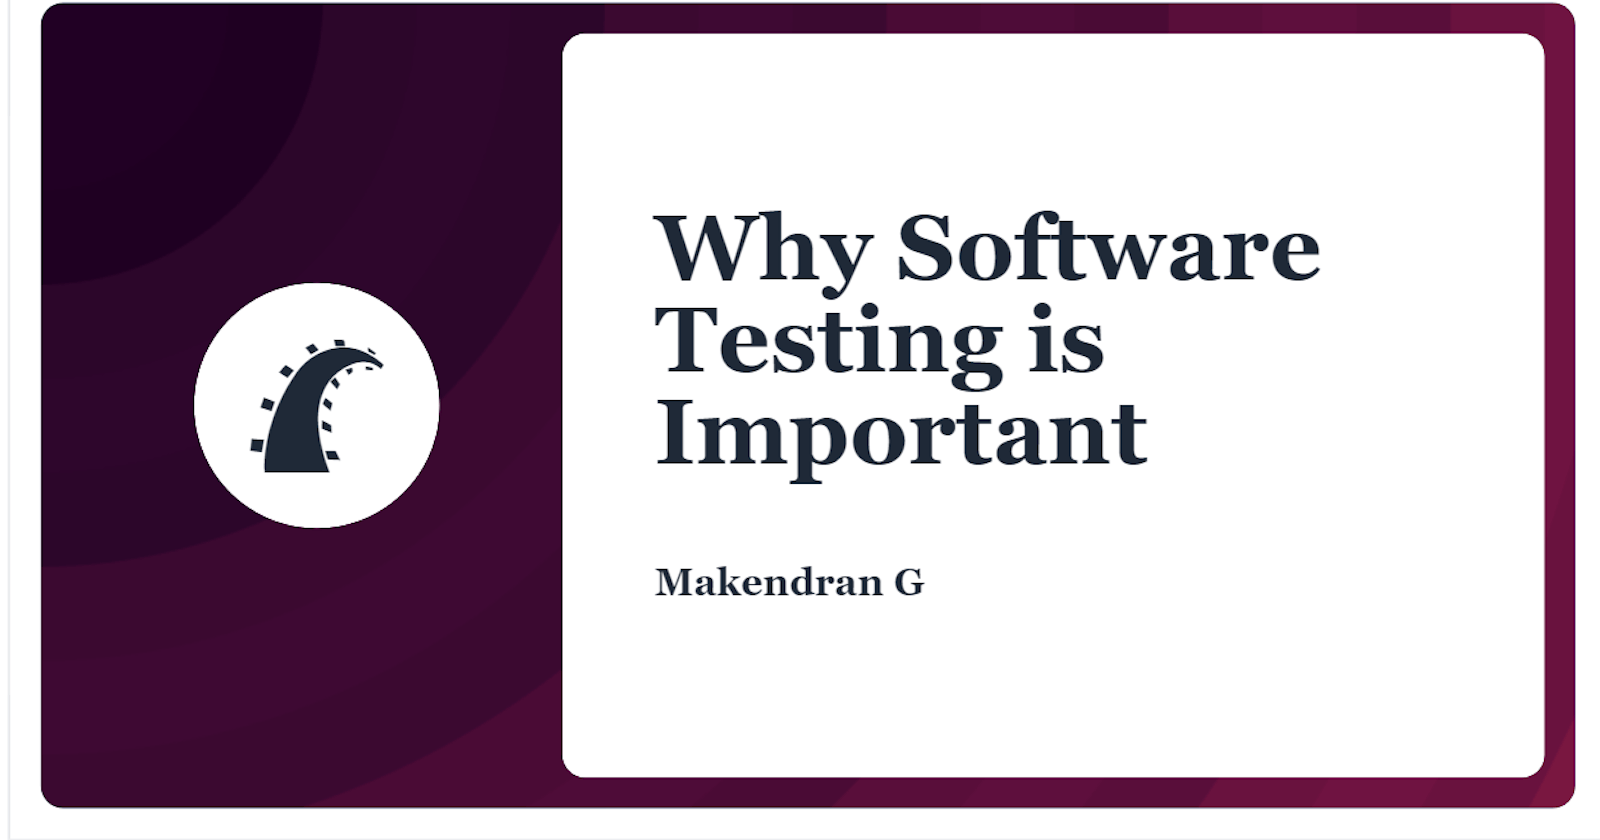 Why Software Testing is Important